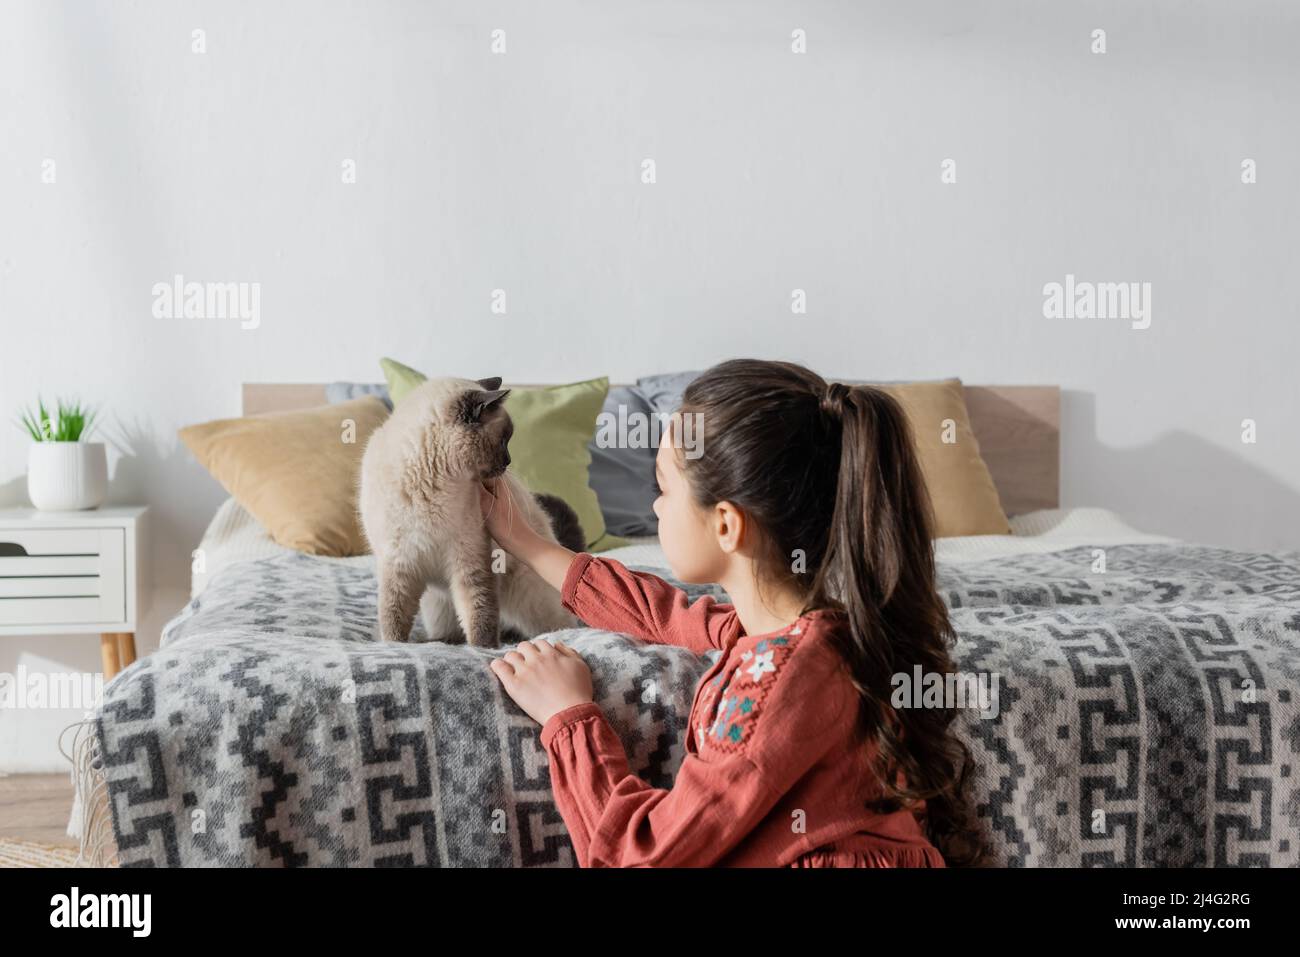 preteen girl with ponytail petting cat sitting on bed with pillows Stock Photo